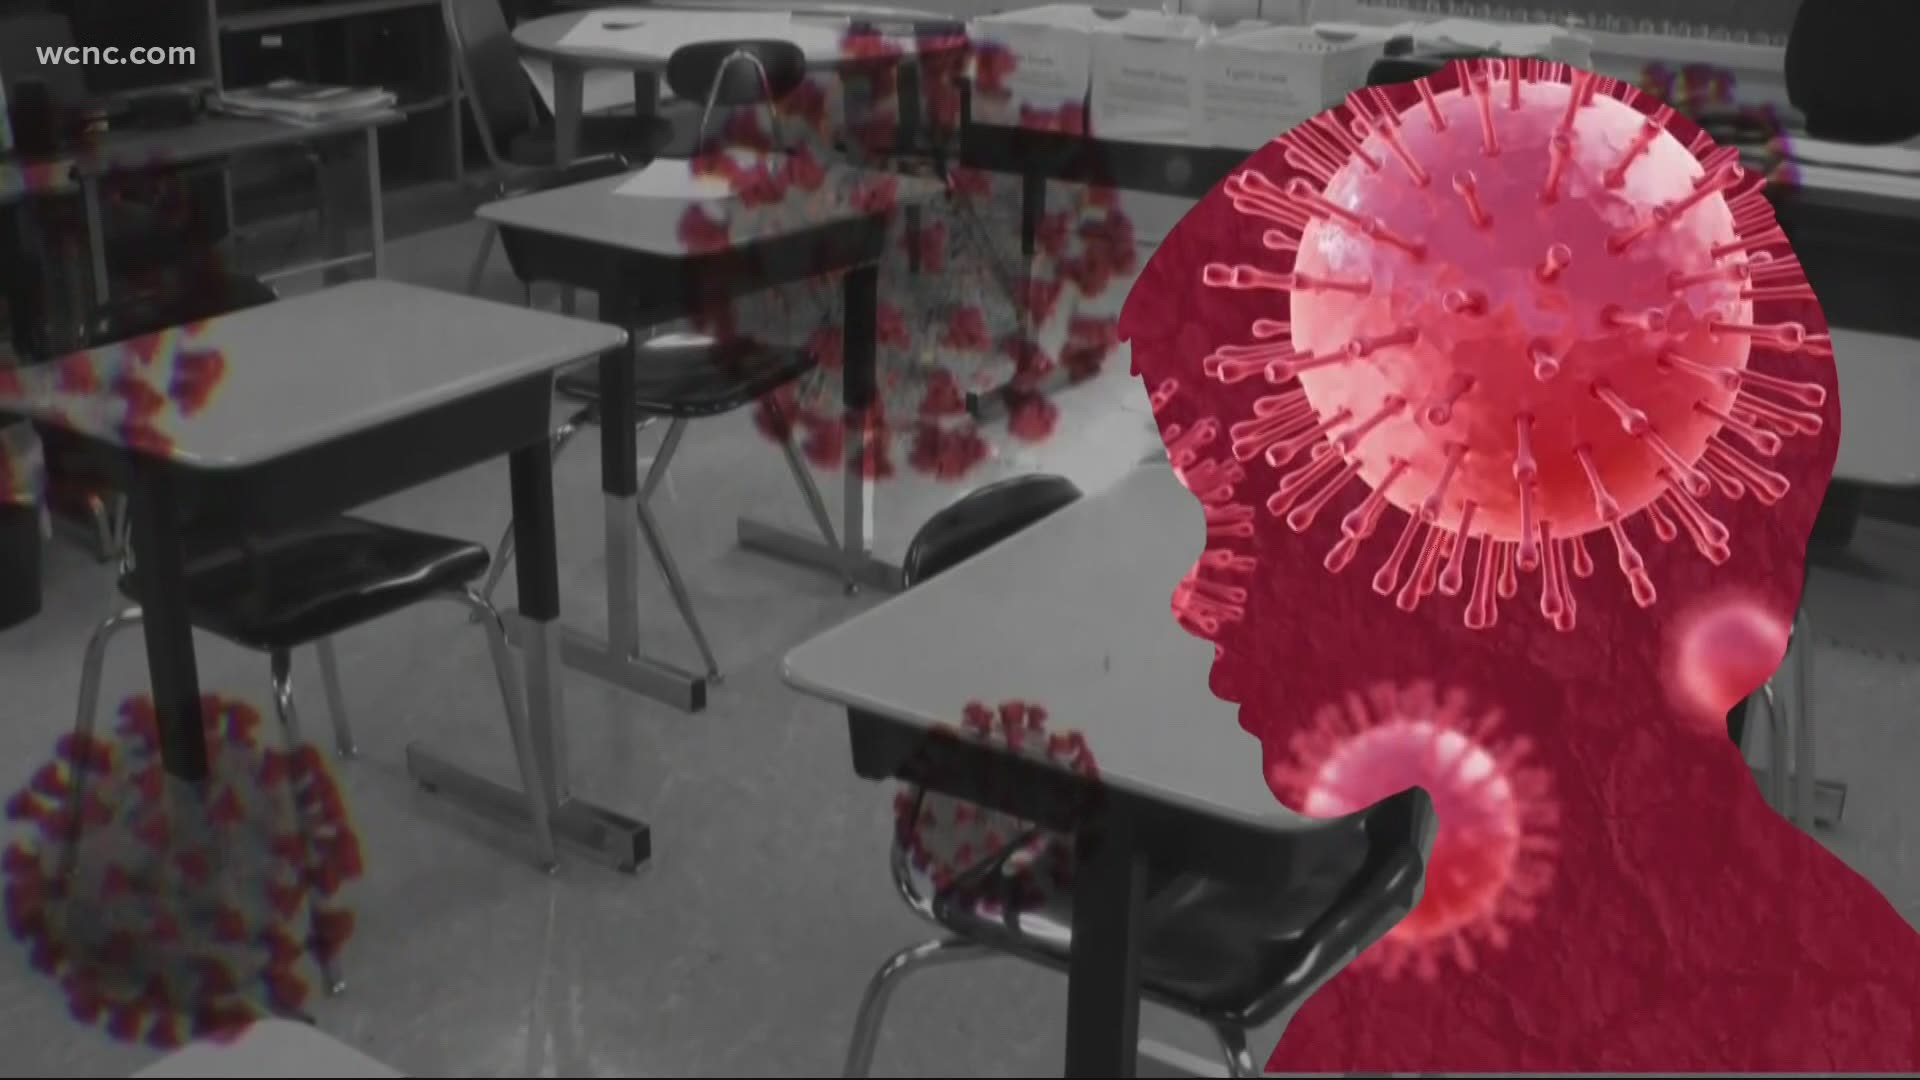 According to officials, there are 126 cases of coronavirus associated with active clusters inside of North Carolina schools.